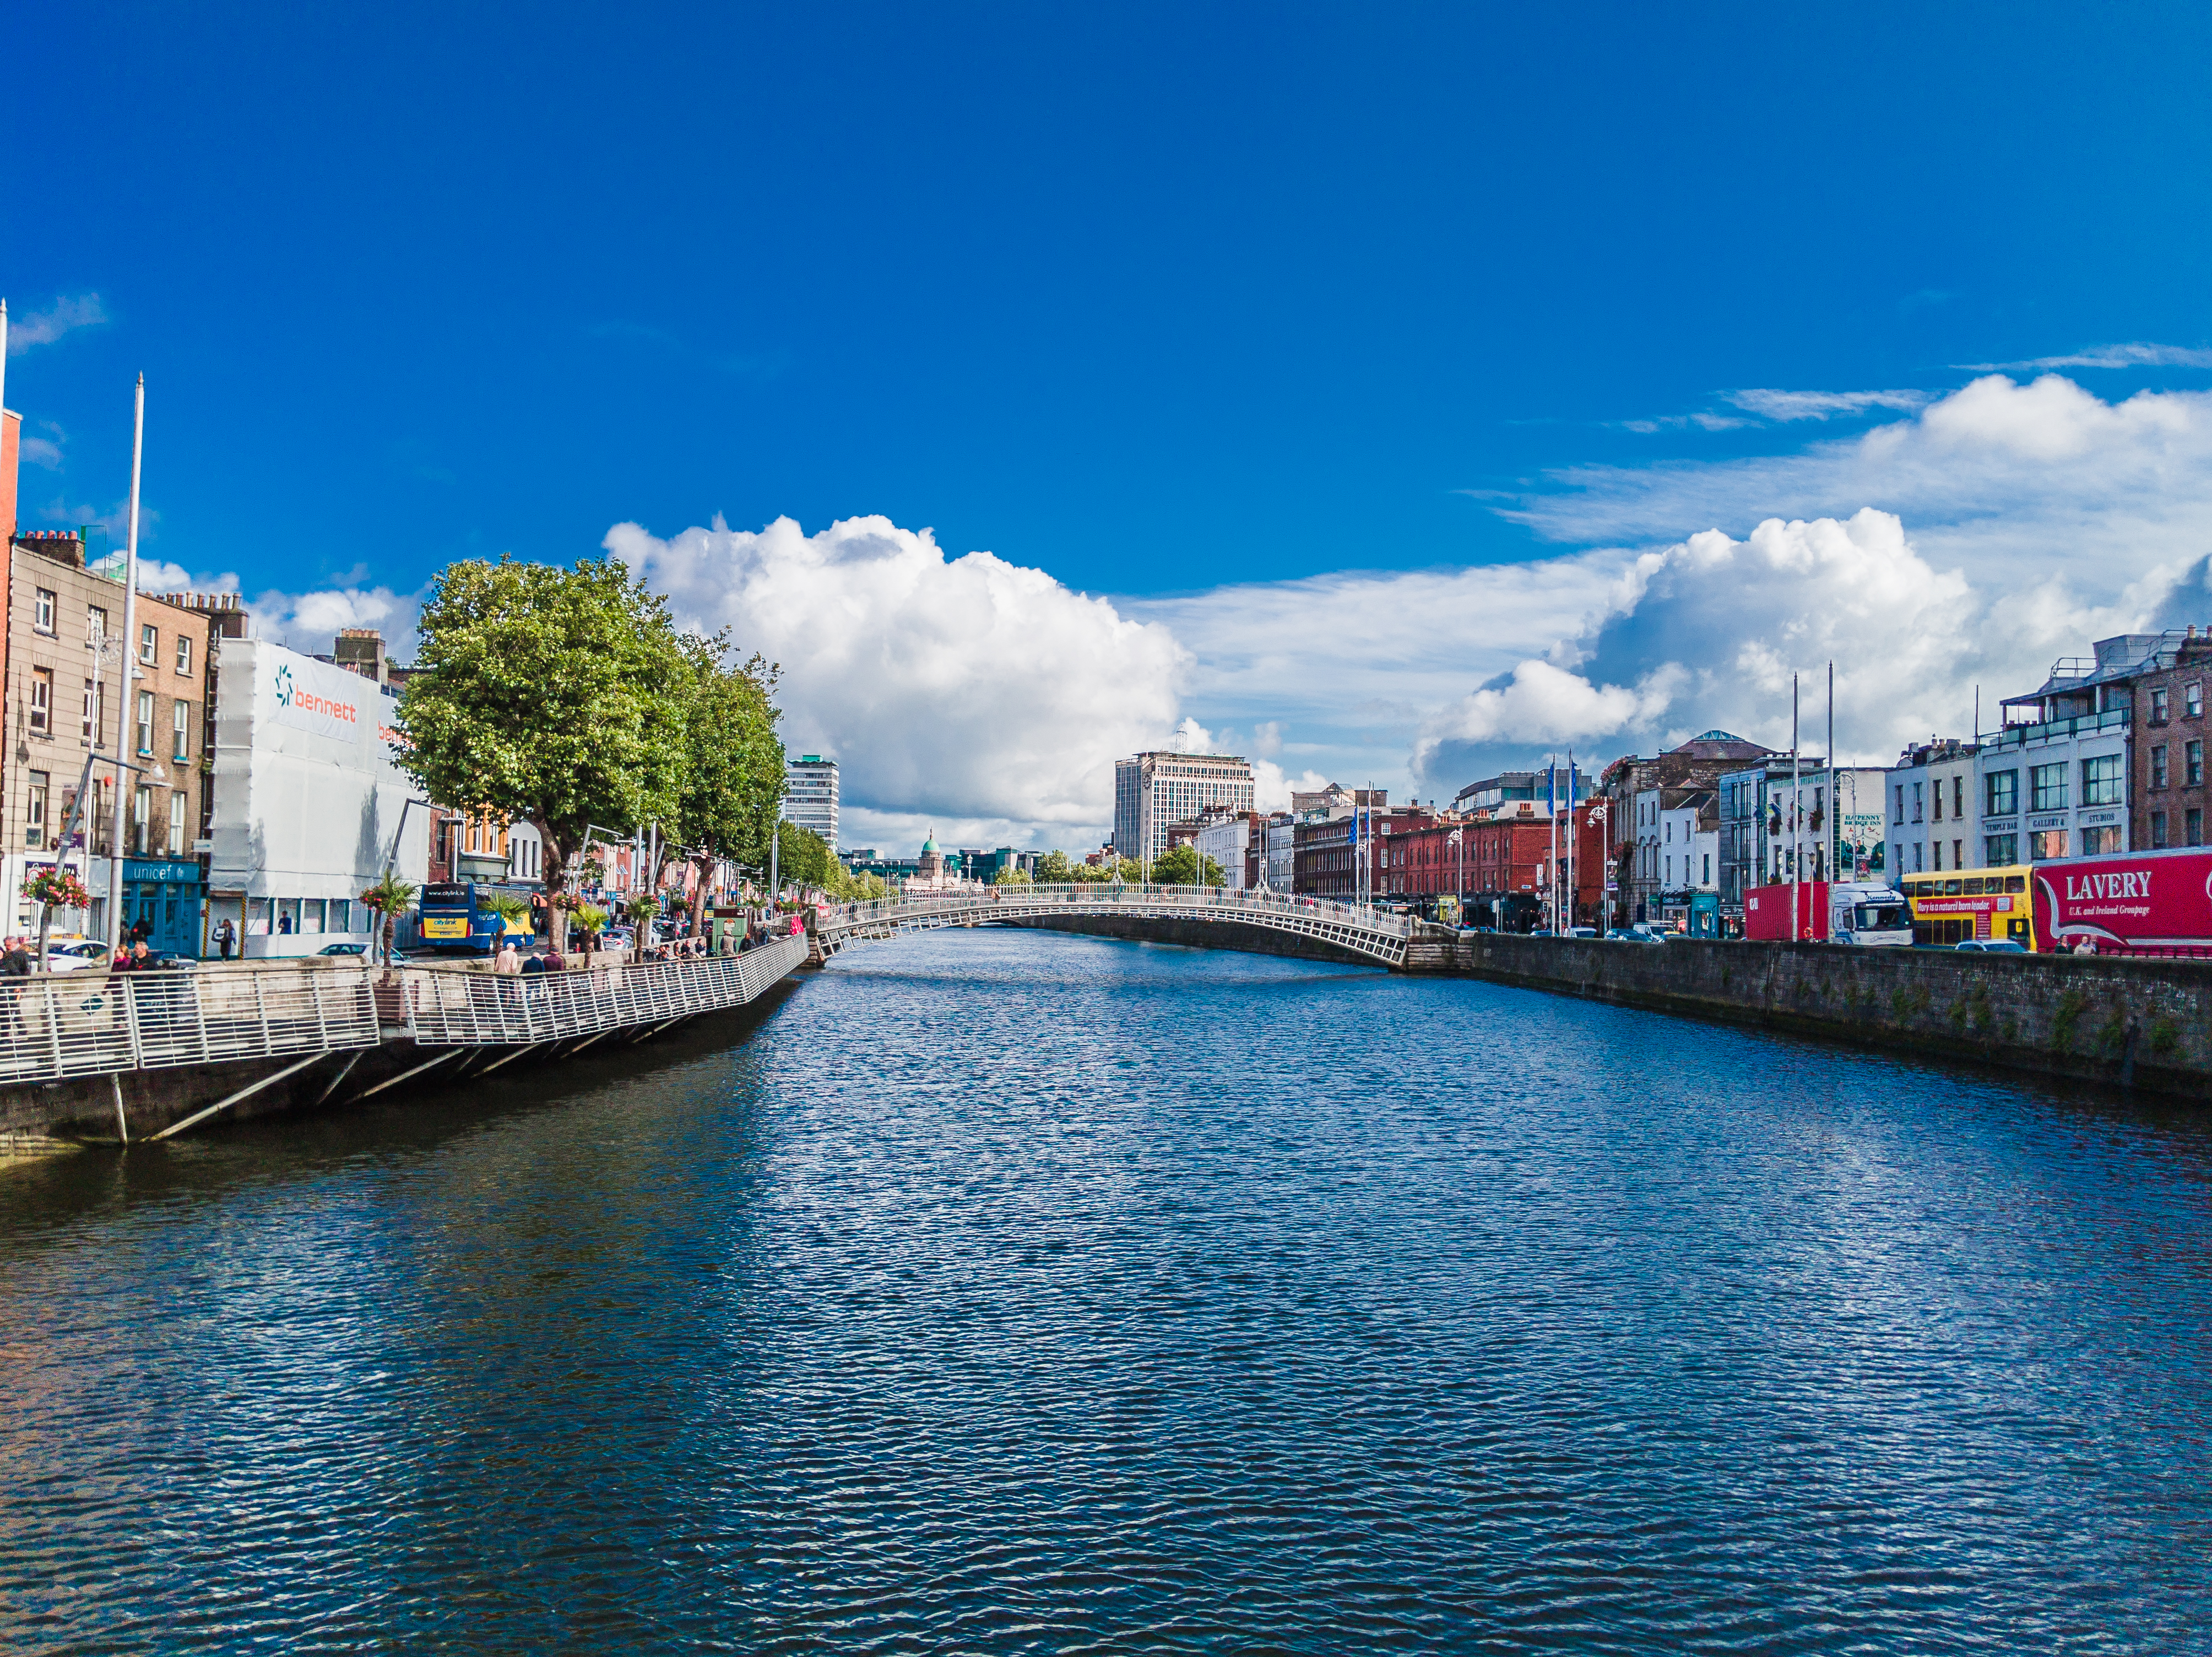 There are many things to do in Dublin, but if you aren’t interested in history, but may feel overwhelmed. Here are 10 things to do in Ireland’s capital that are more than museums.